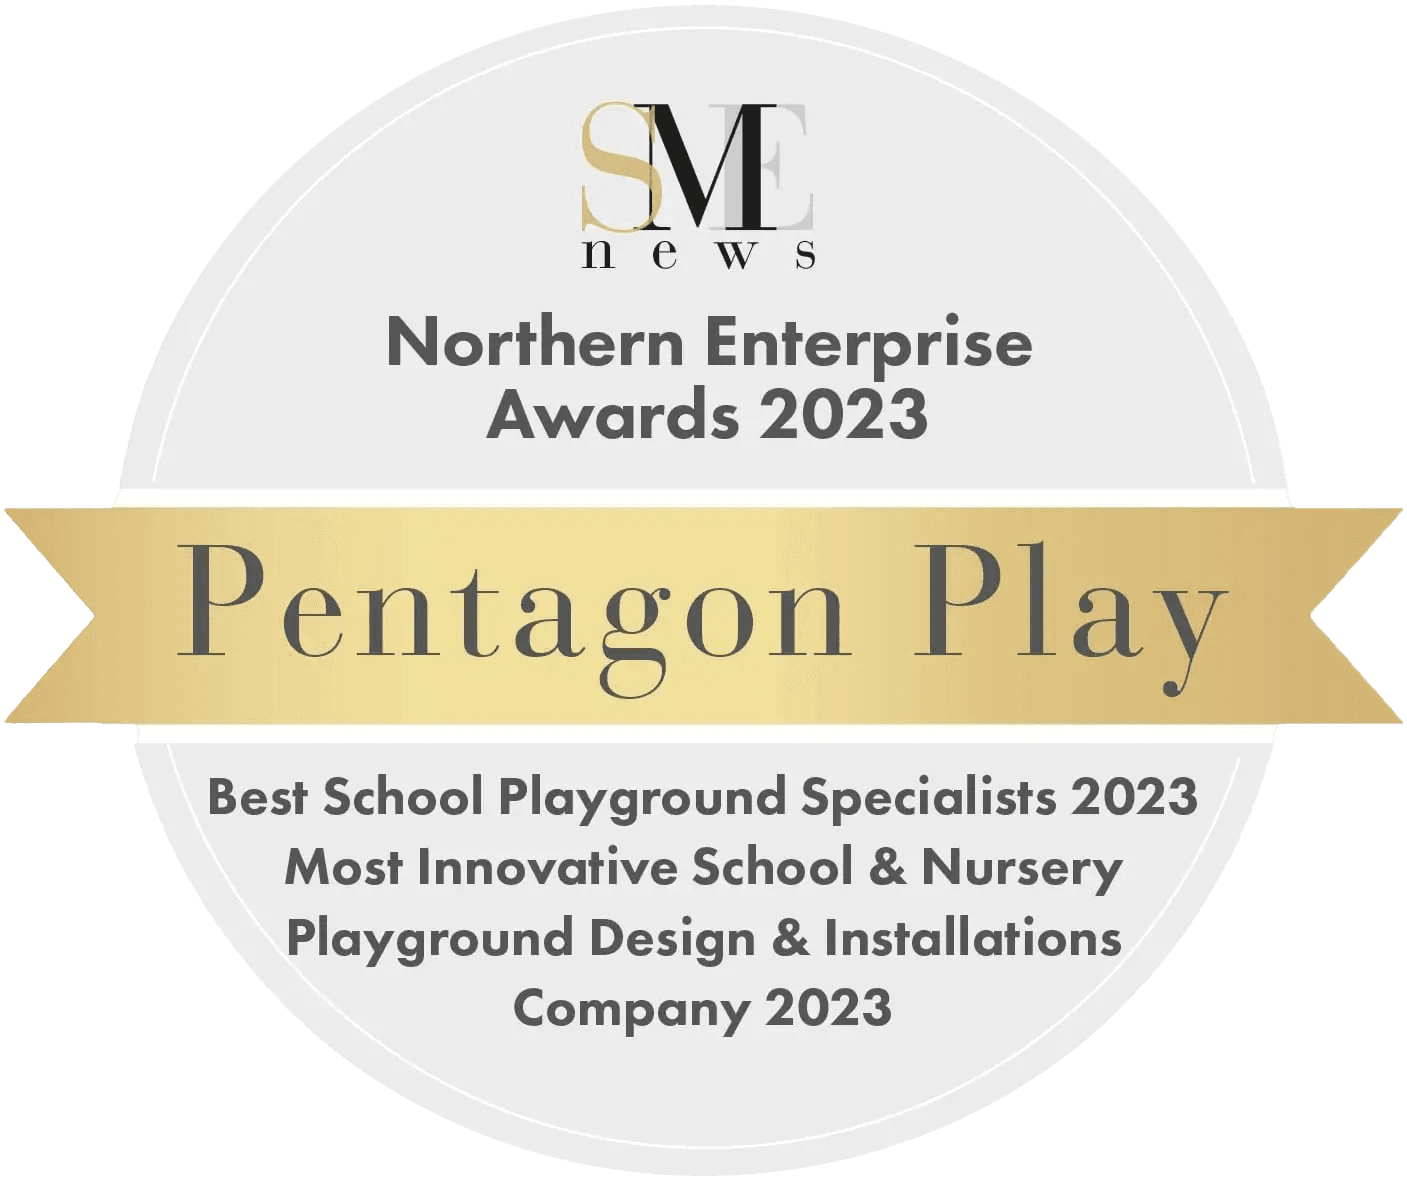 award won by Pentagon Play for Most Innovative School and Nursery Playground Design & Installations Company 2023